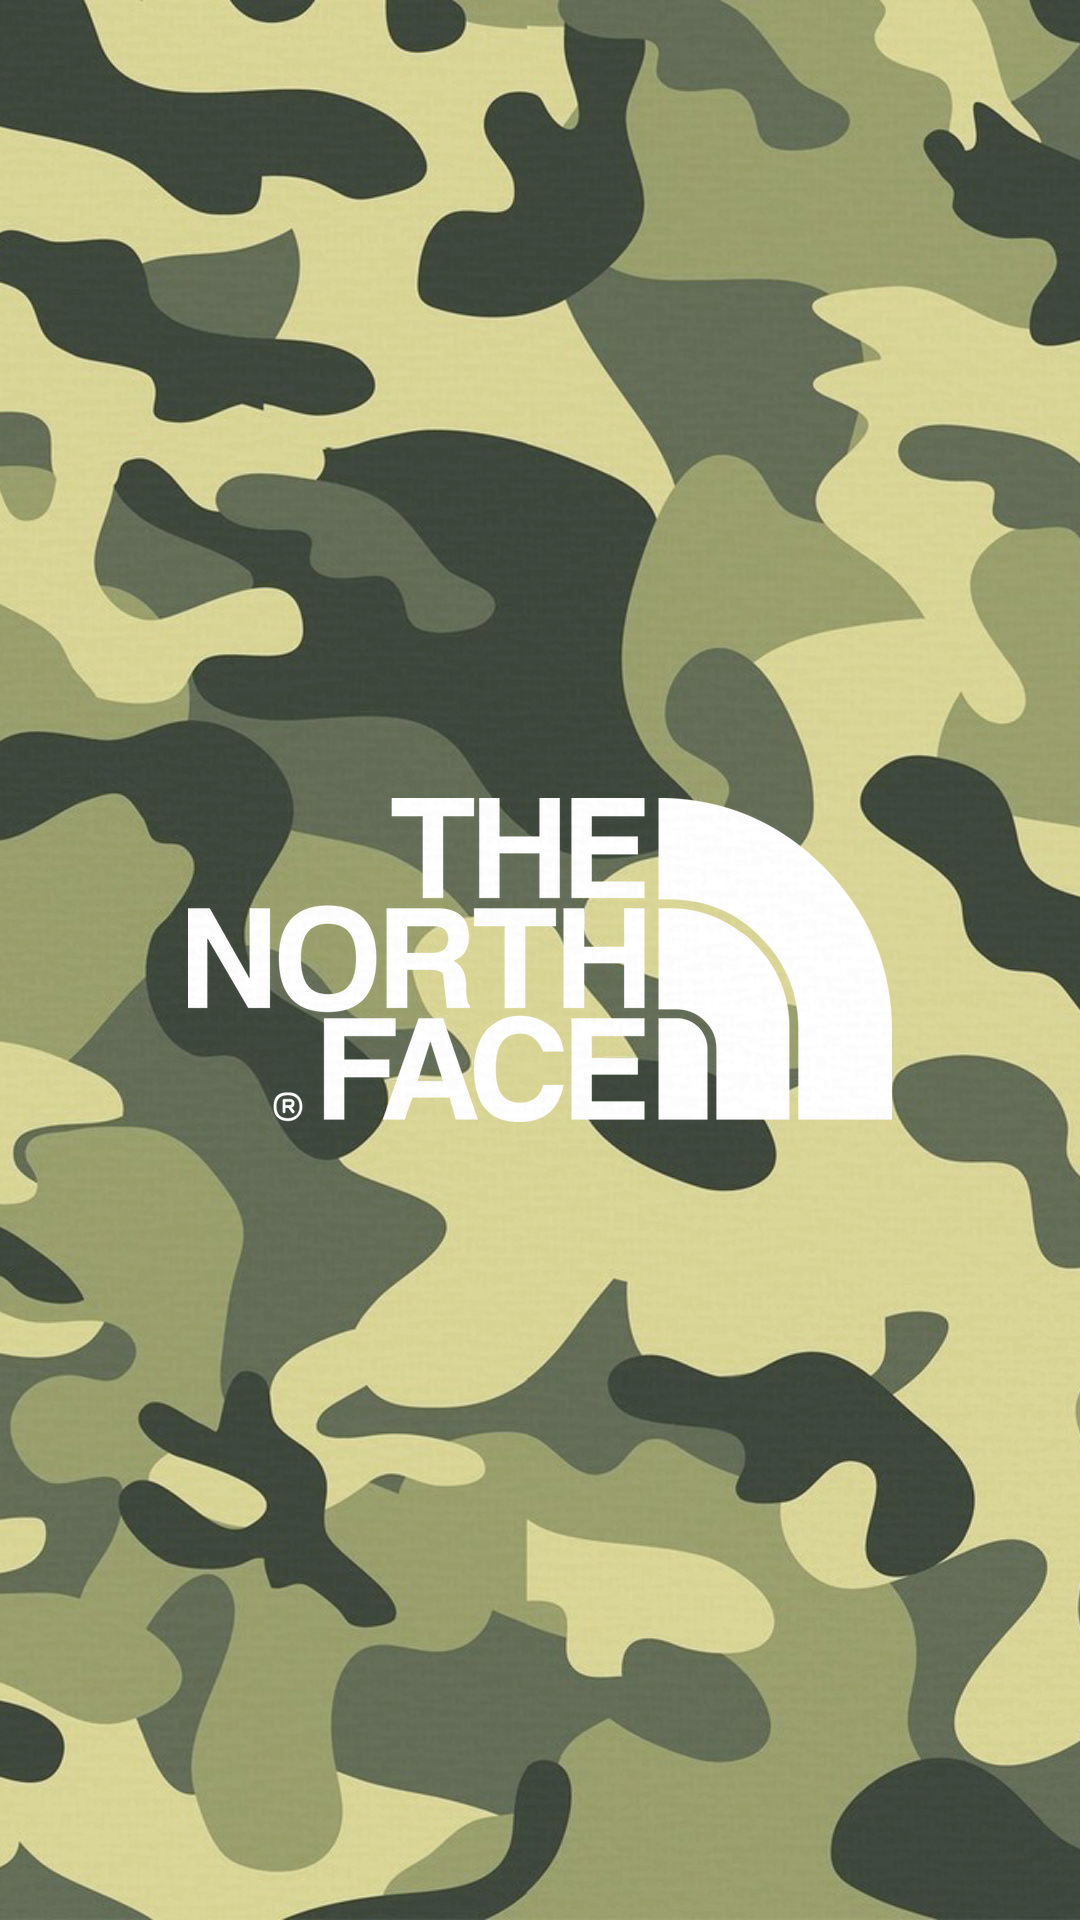 The North Face Iphone Wallpapers